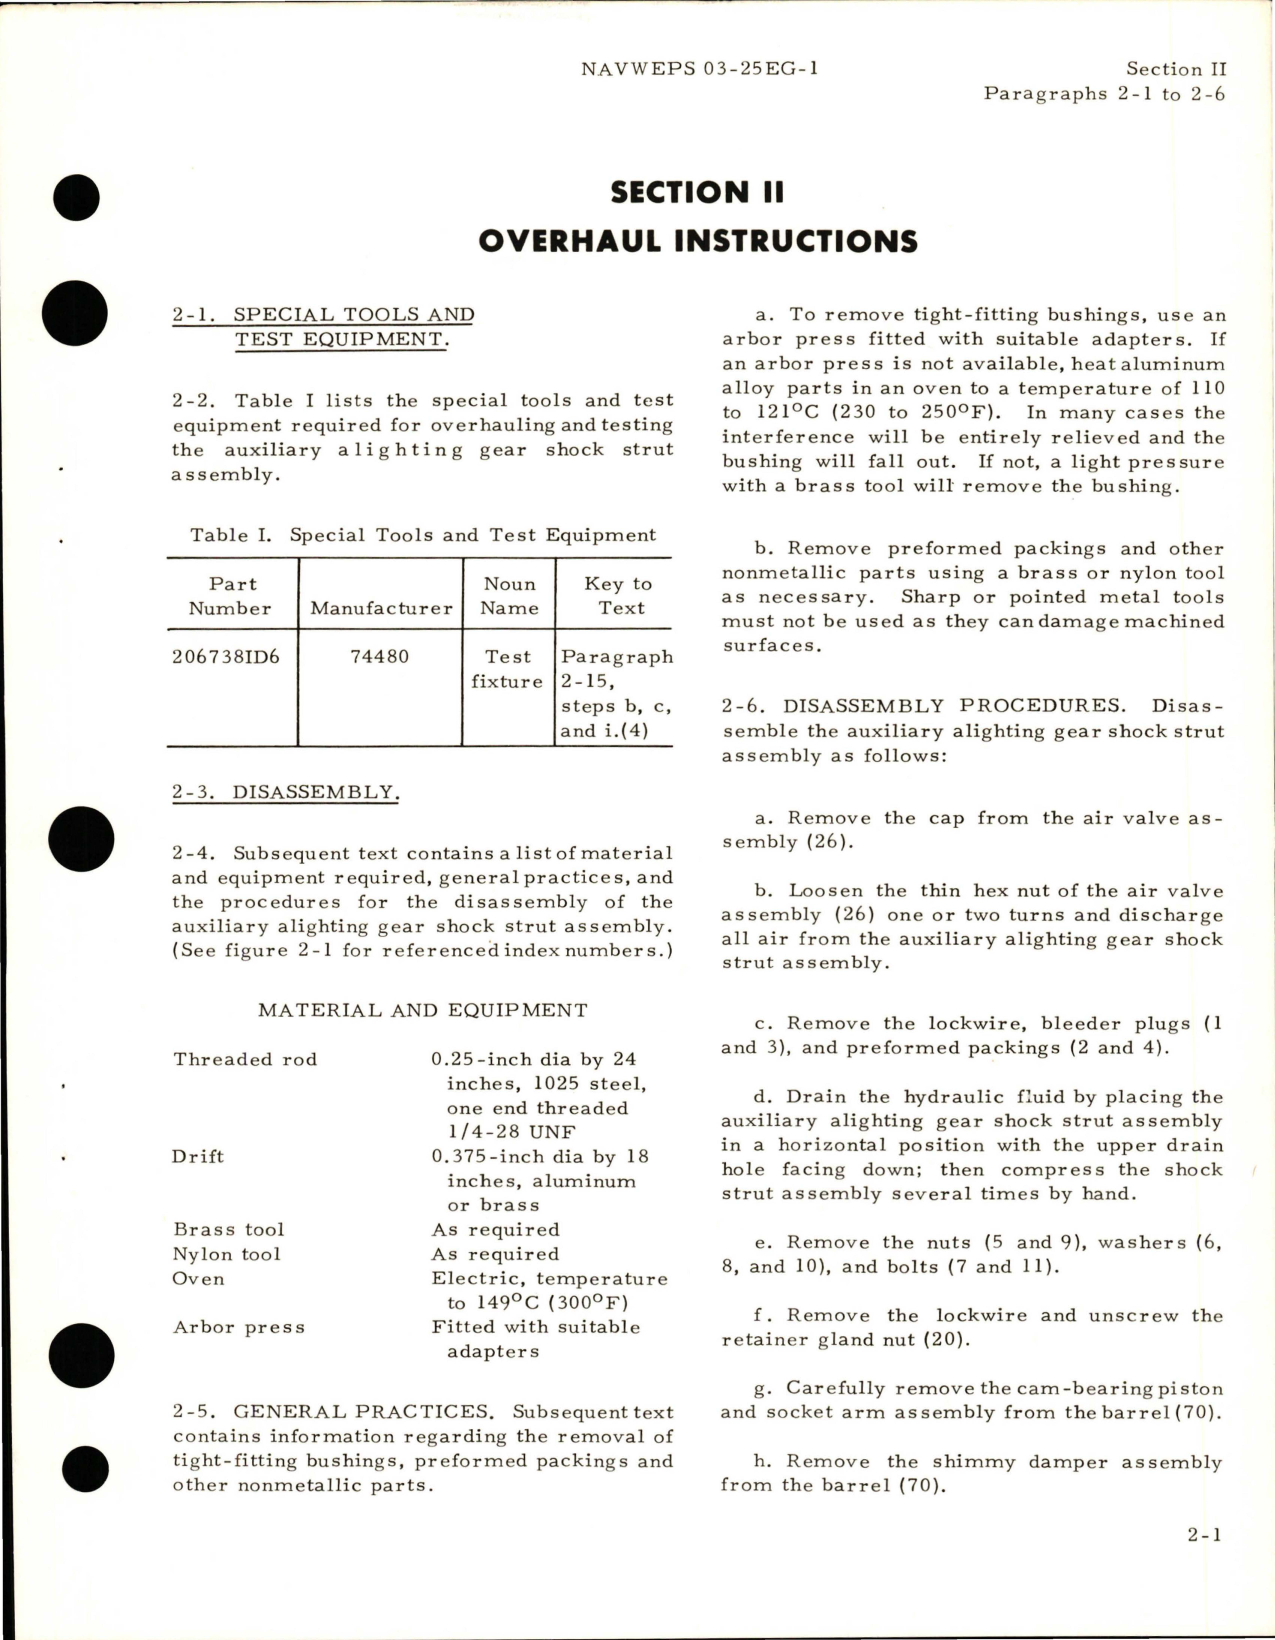 Sample page 7 from AirCorps Library document: Overhaul Instructions for Auxiliary Alighting Gear Shock Strut Assembly - Part A02L2000-2 and A02L2000-4